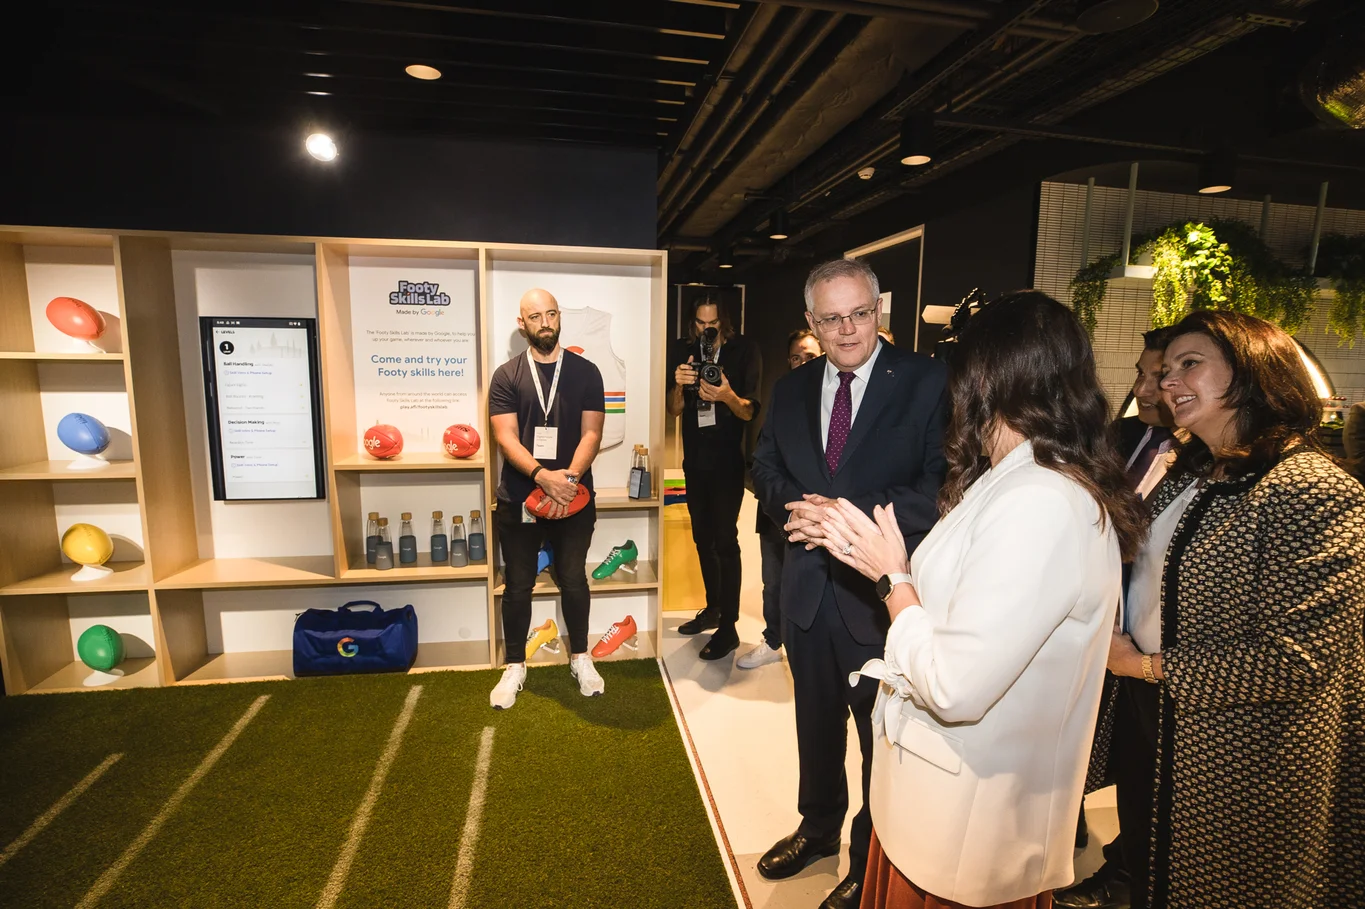 Prime Minister Scott Morrison hearing about the Footy Skills Lab app